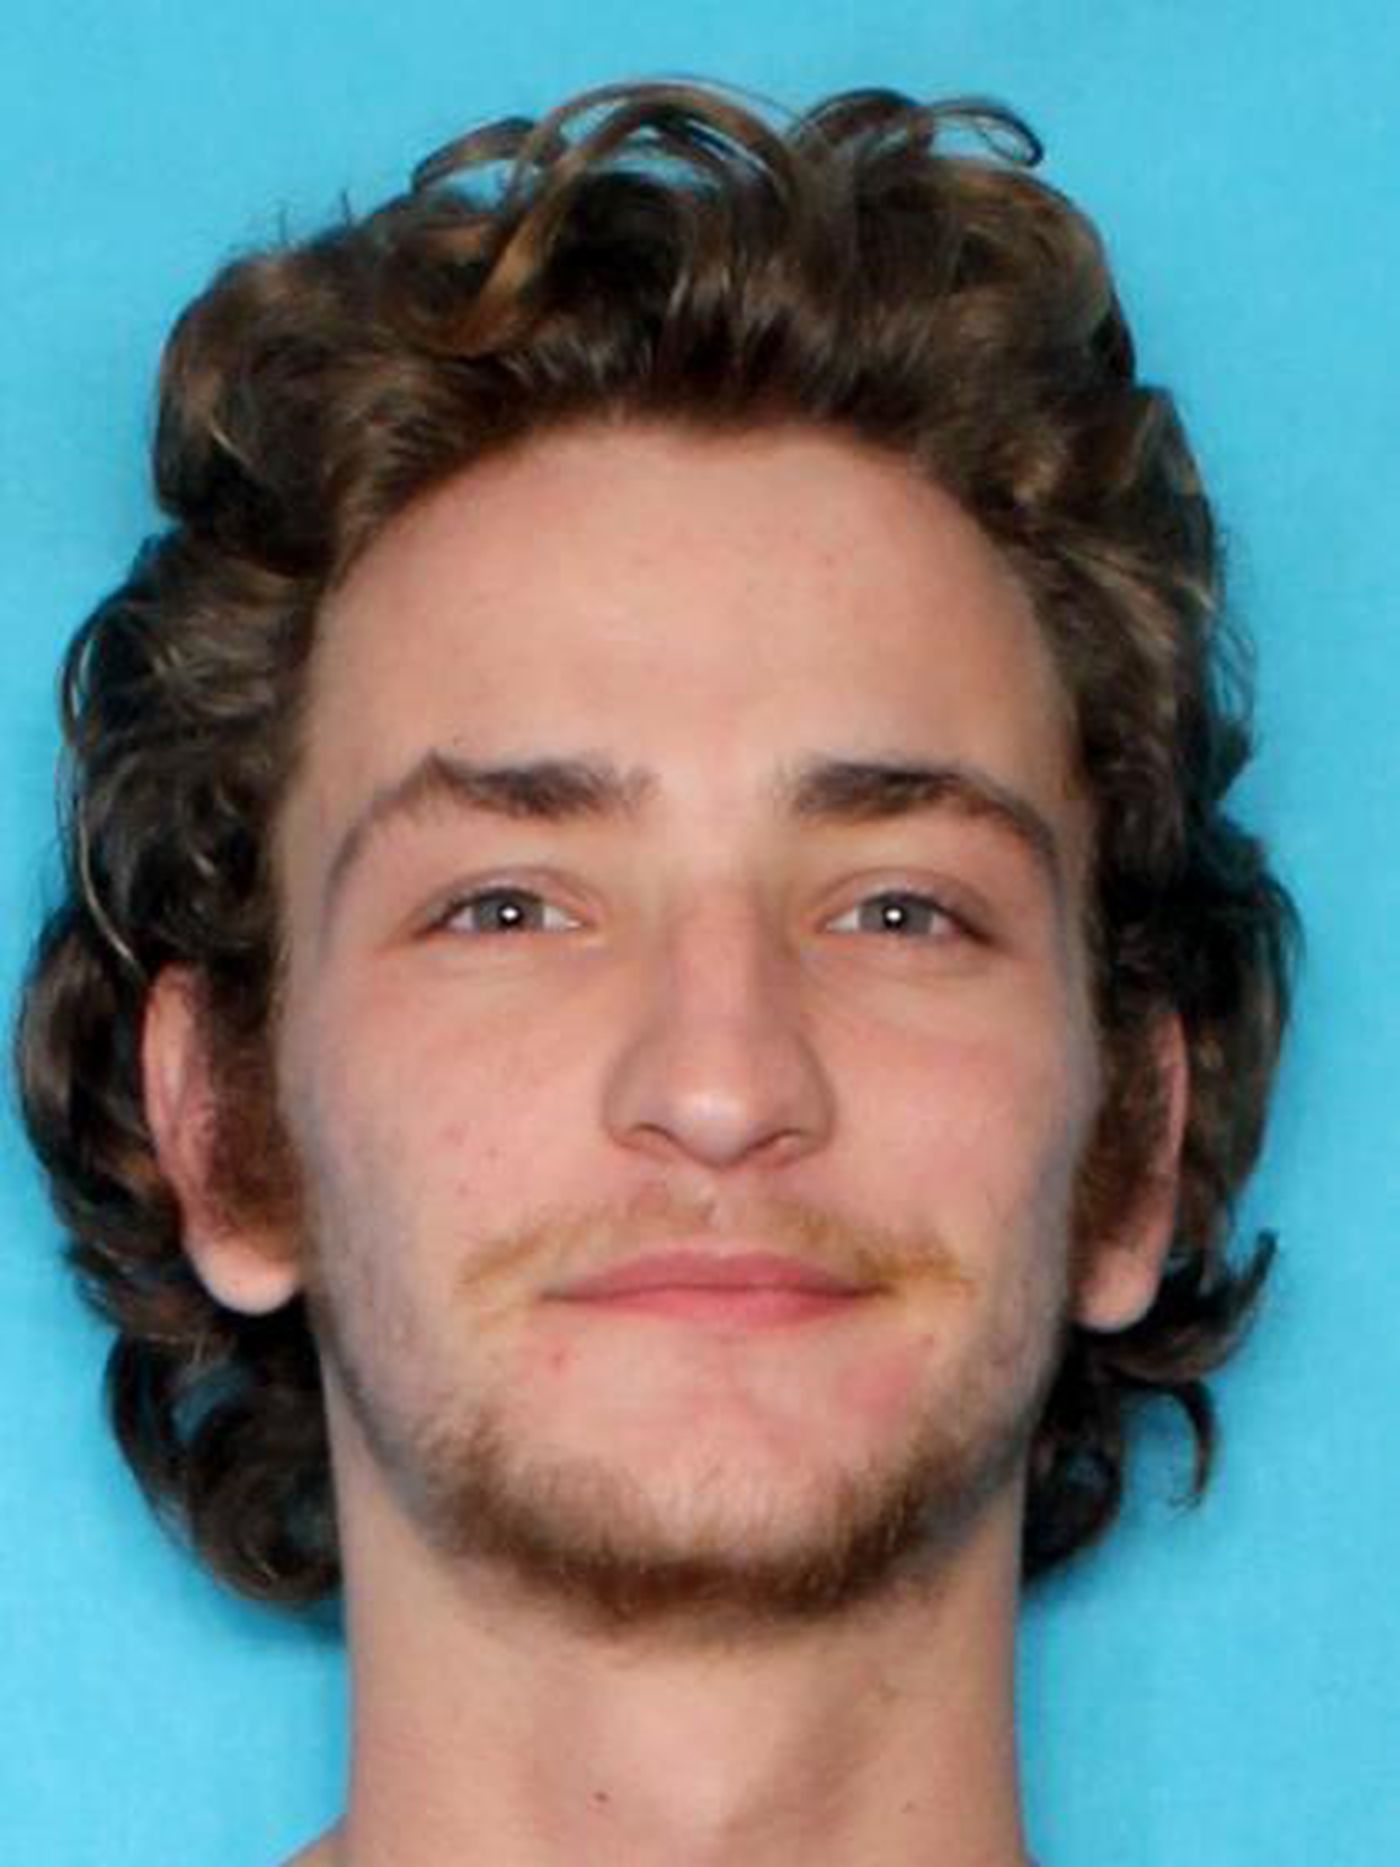 The most recent photo of Dakota Theriot, 21, suspected gunman accused of killing his parents, his girlfriend, and 2 of her family members in Louisiana.